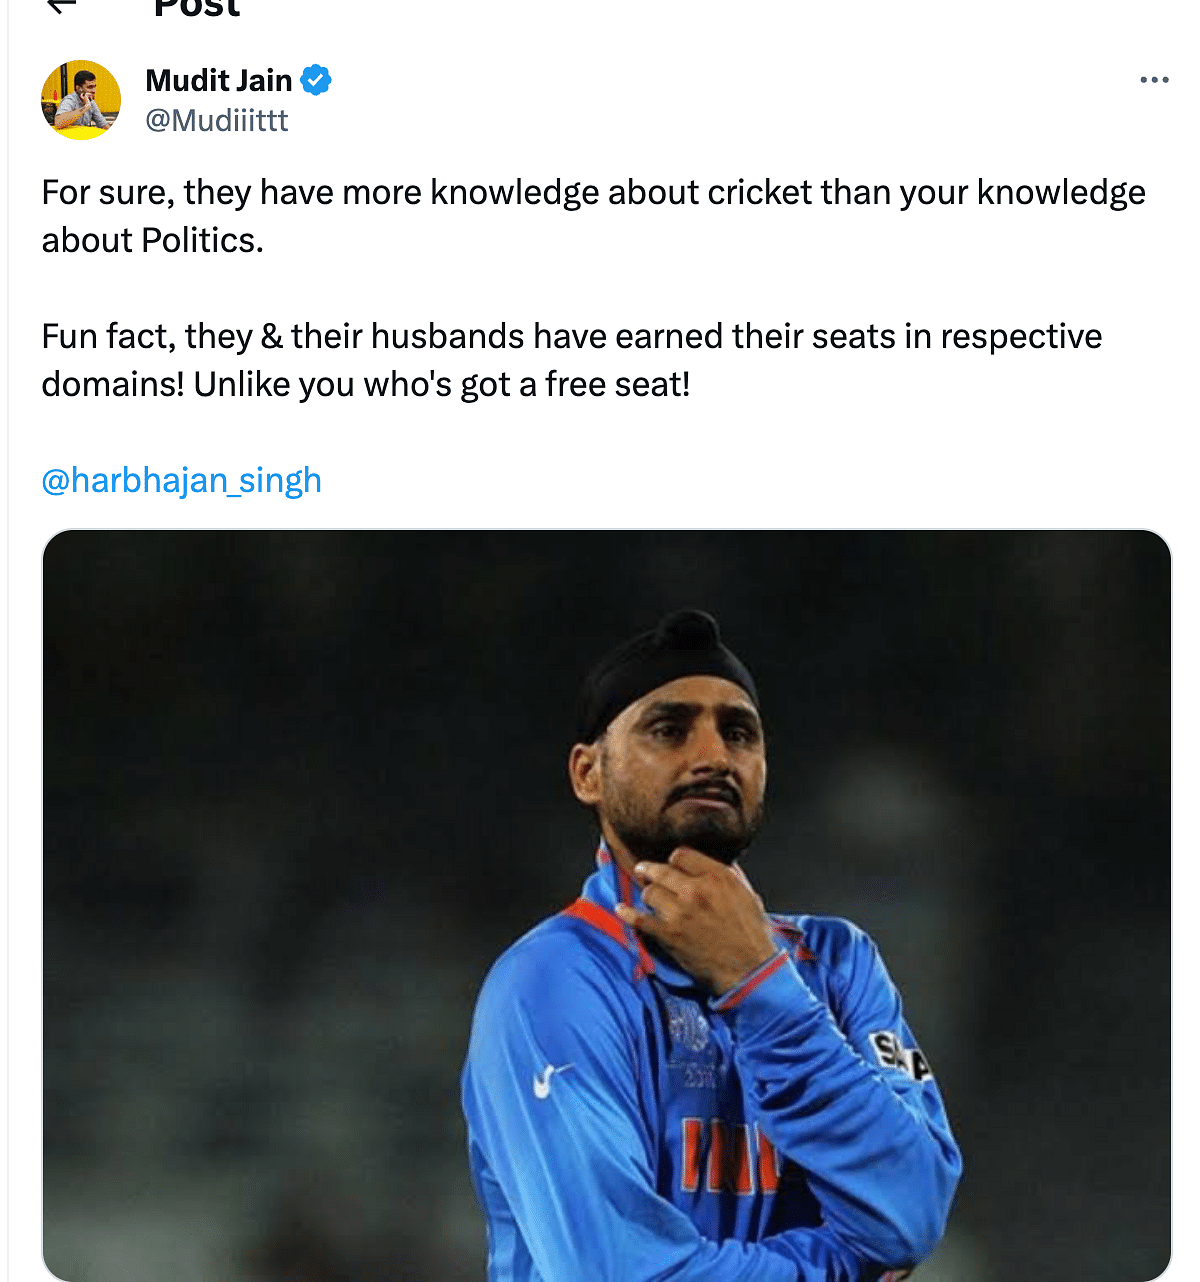 Harbhajan Singh questioned Anushka & Athiya's knowledge about cricket during the ICC World Cup final match.